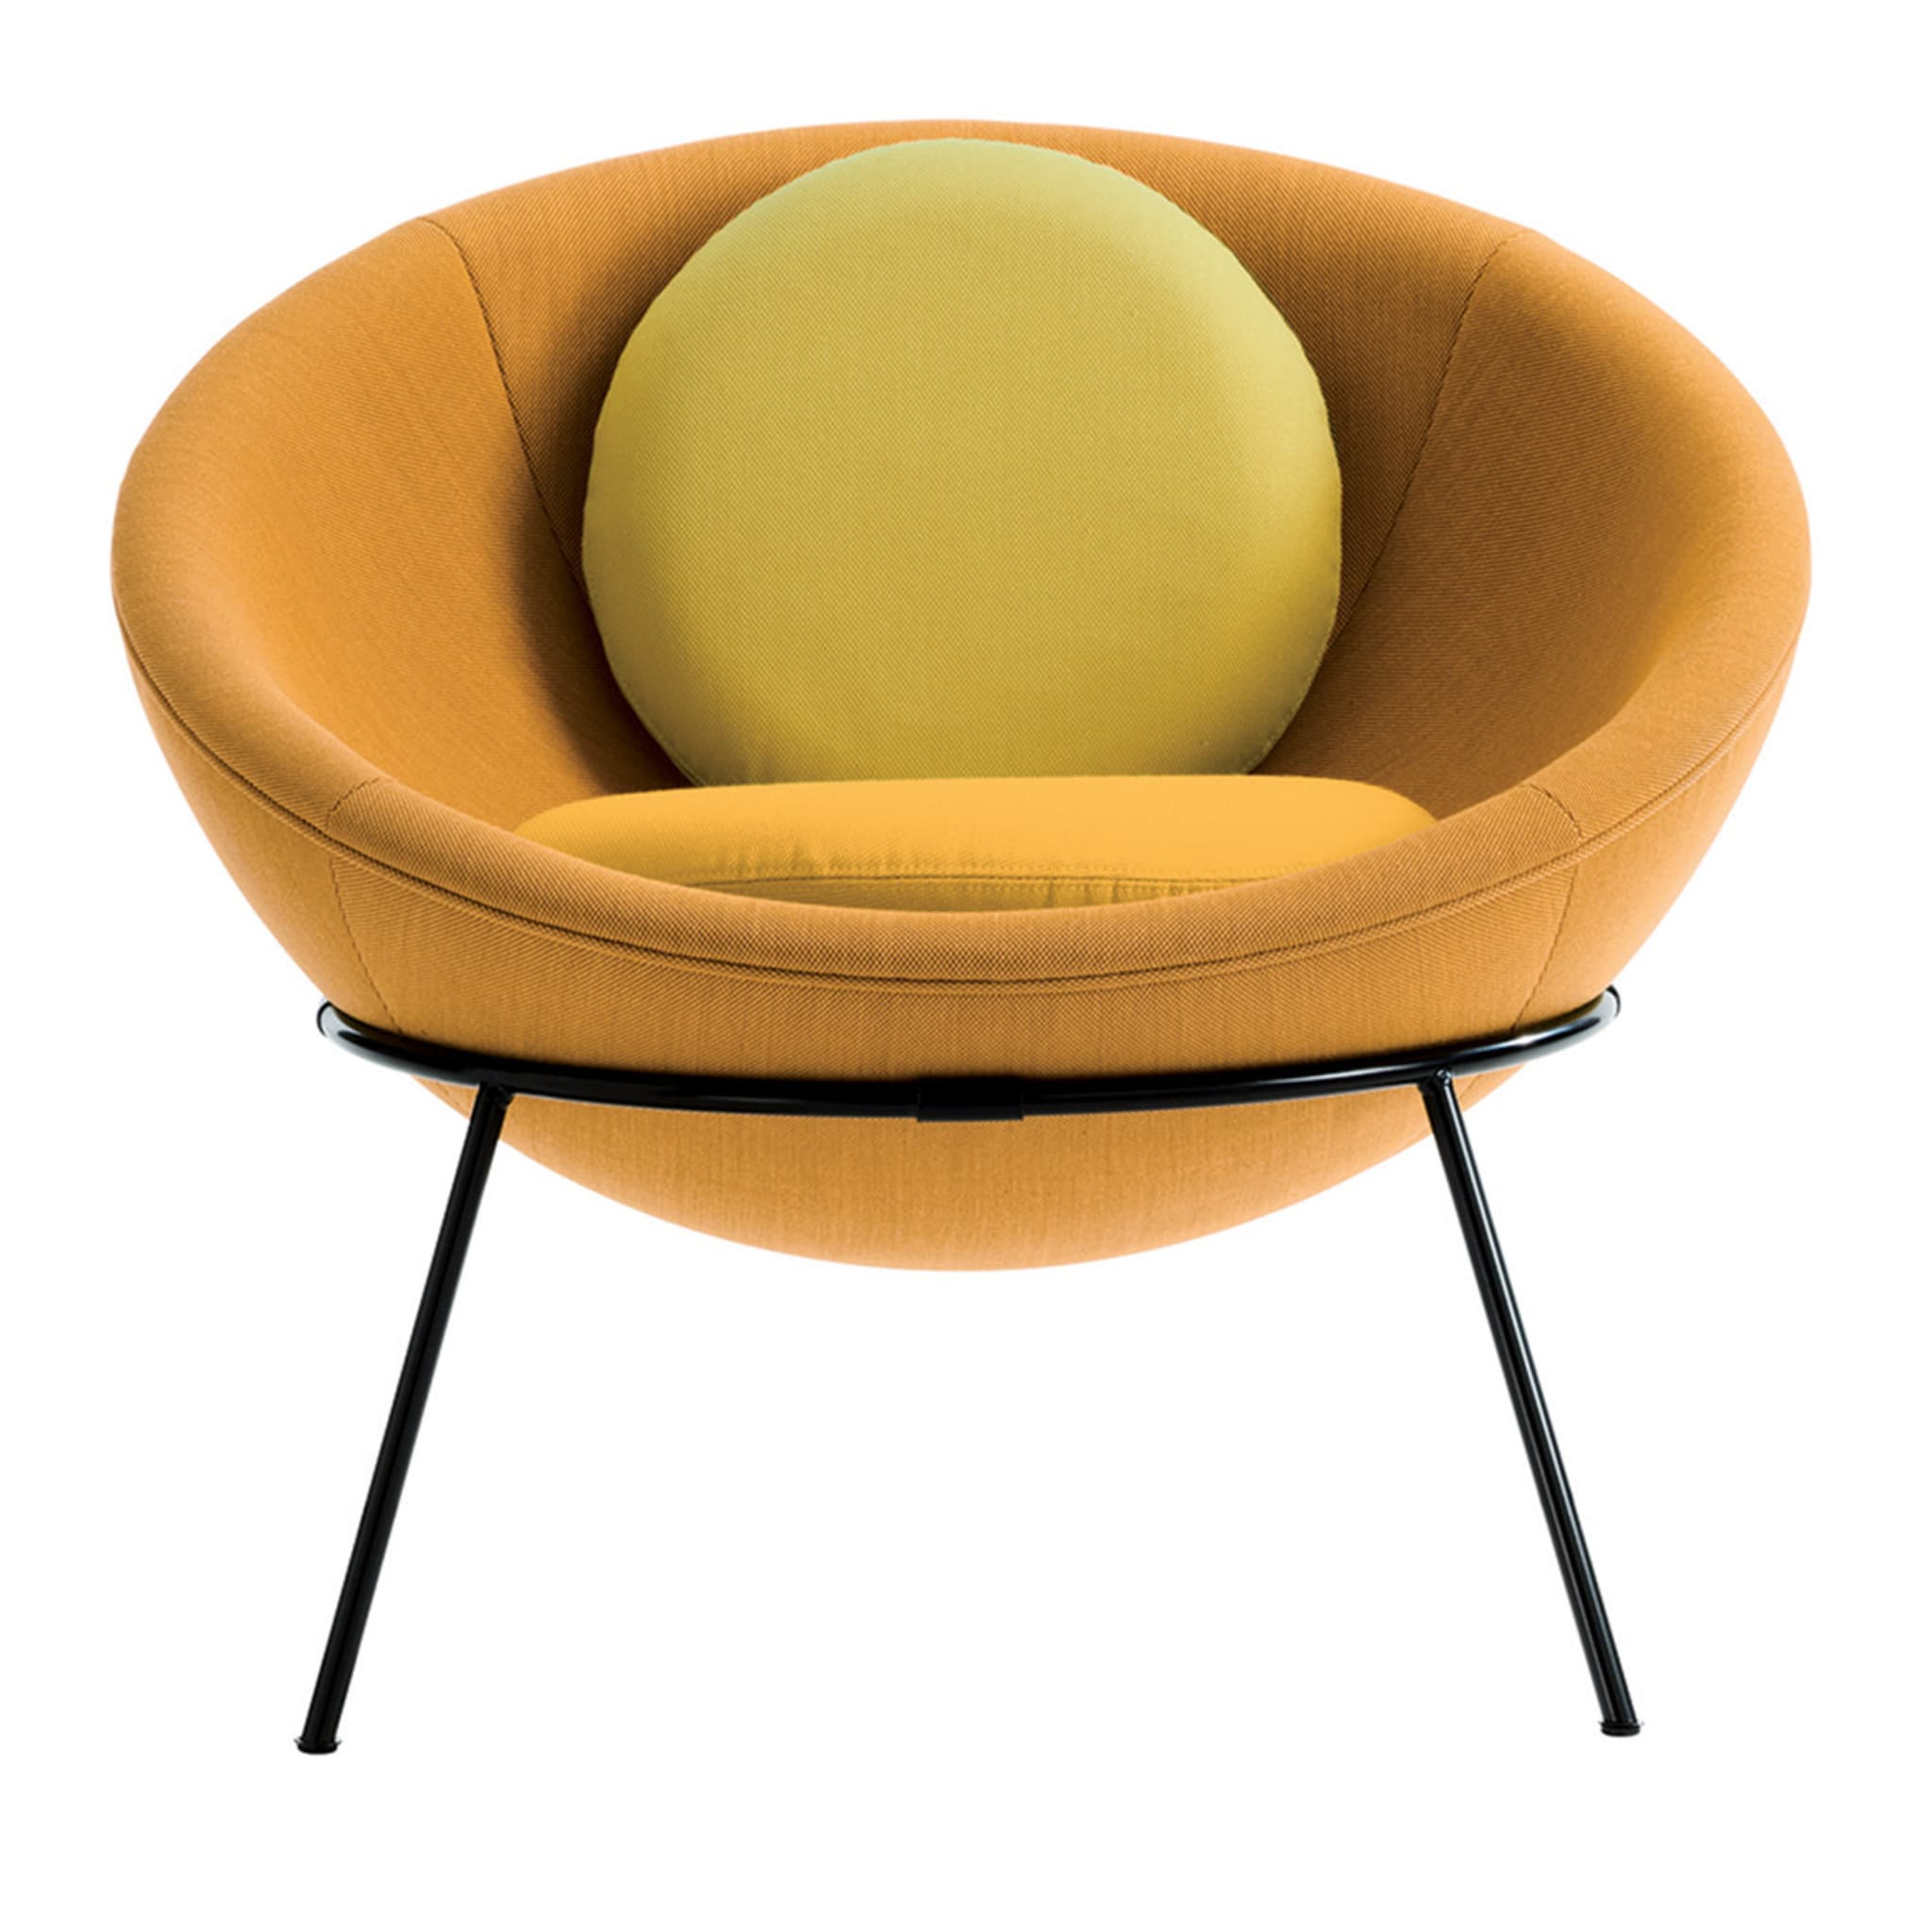 Bowl Chair Yellow Nuance - Main view